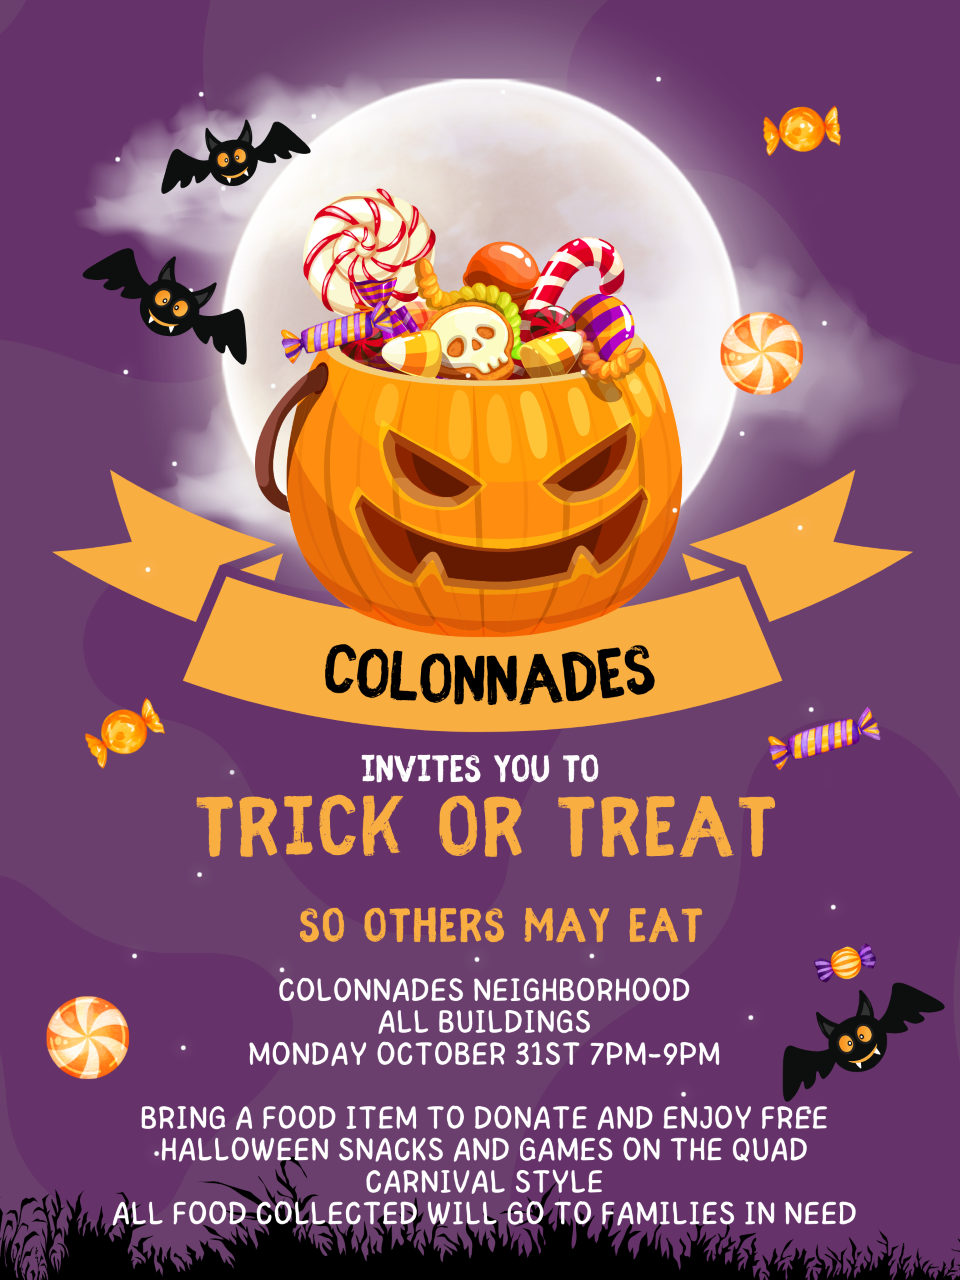 Colonnades invites you to trick or treat so others can eat. Colonnades neighborhood all building. Monday Oct 31, 7 pm to 9 pm. Bring a food item to donate